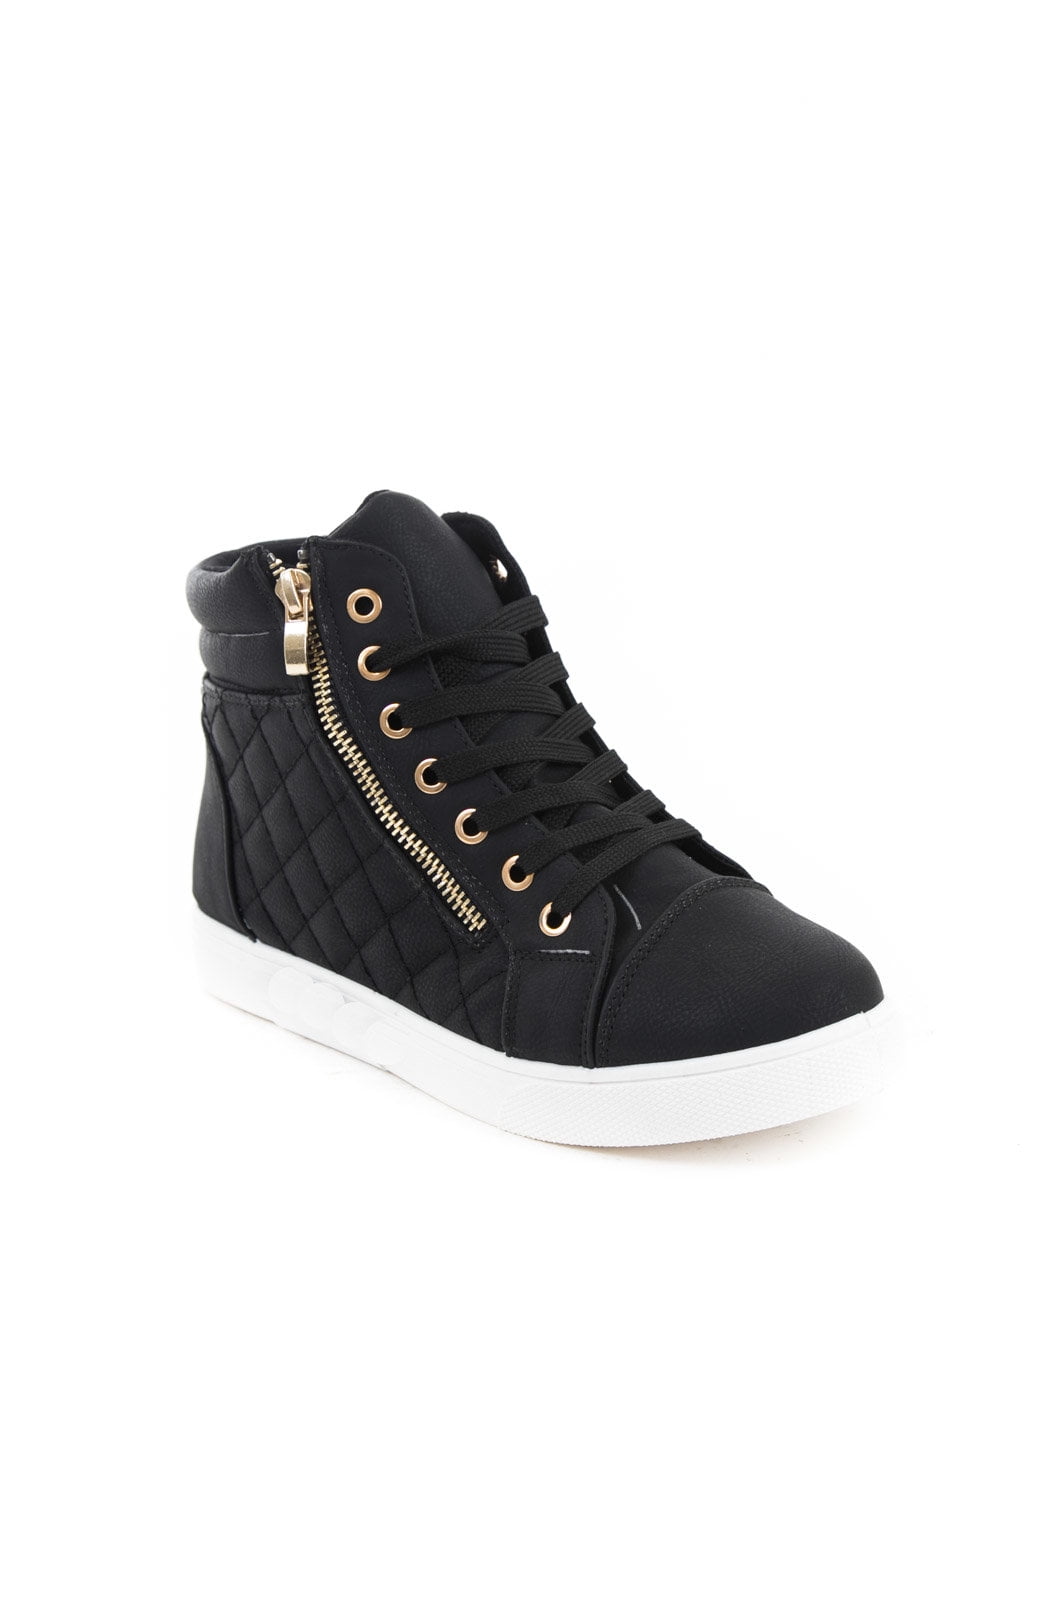 soho shoes women's leatherette quilted zipper lace up high top sneakers